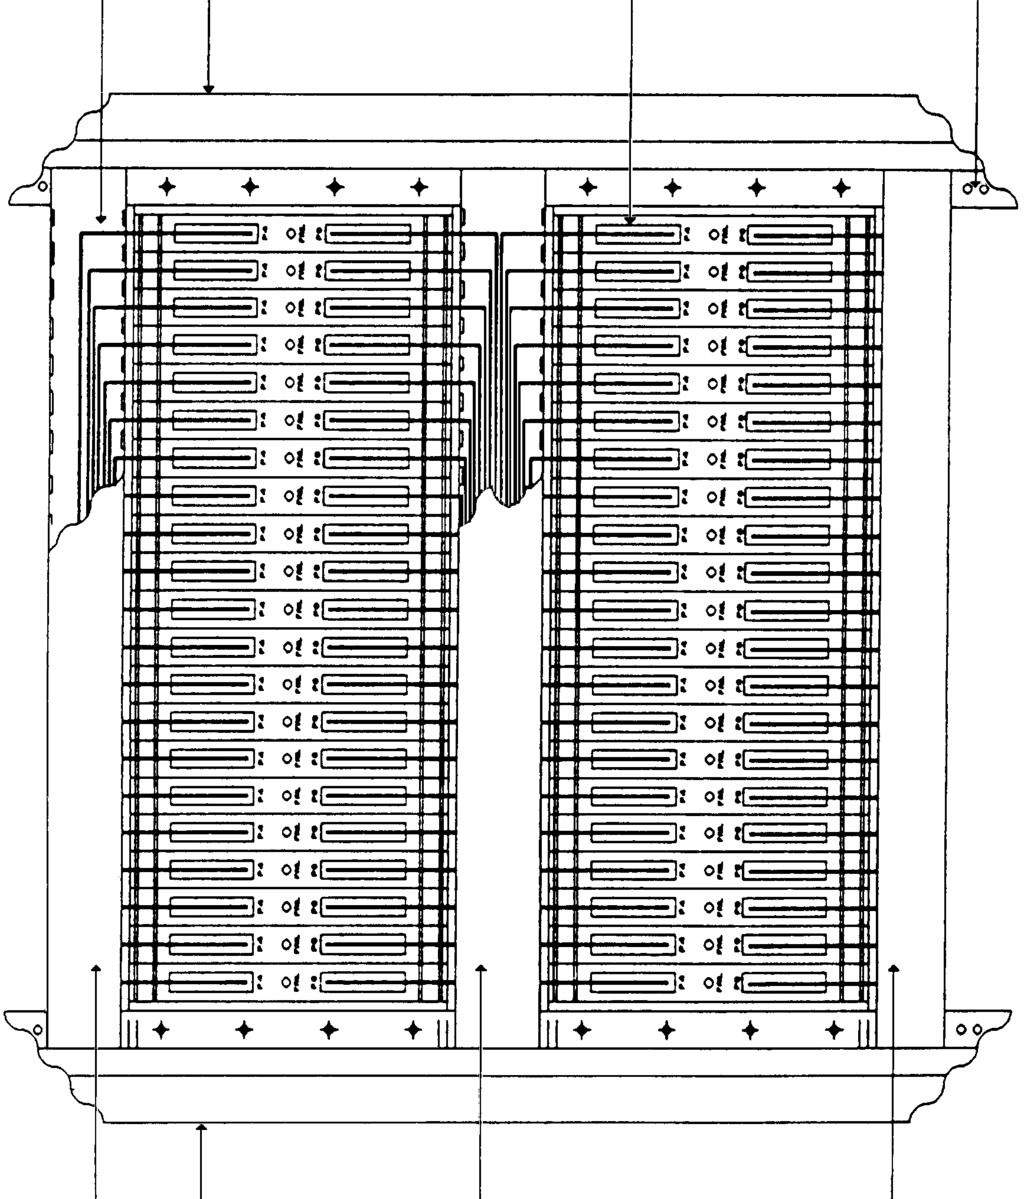 Figure 1-1: Example Transition Panel Installation 000-64-001 BT01 or BT02 Figure 1-2: I/O Subsystem: Front View CABLE TRAY FLAT CABLE CABINET